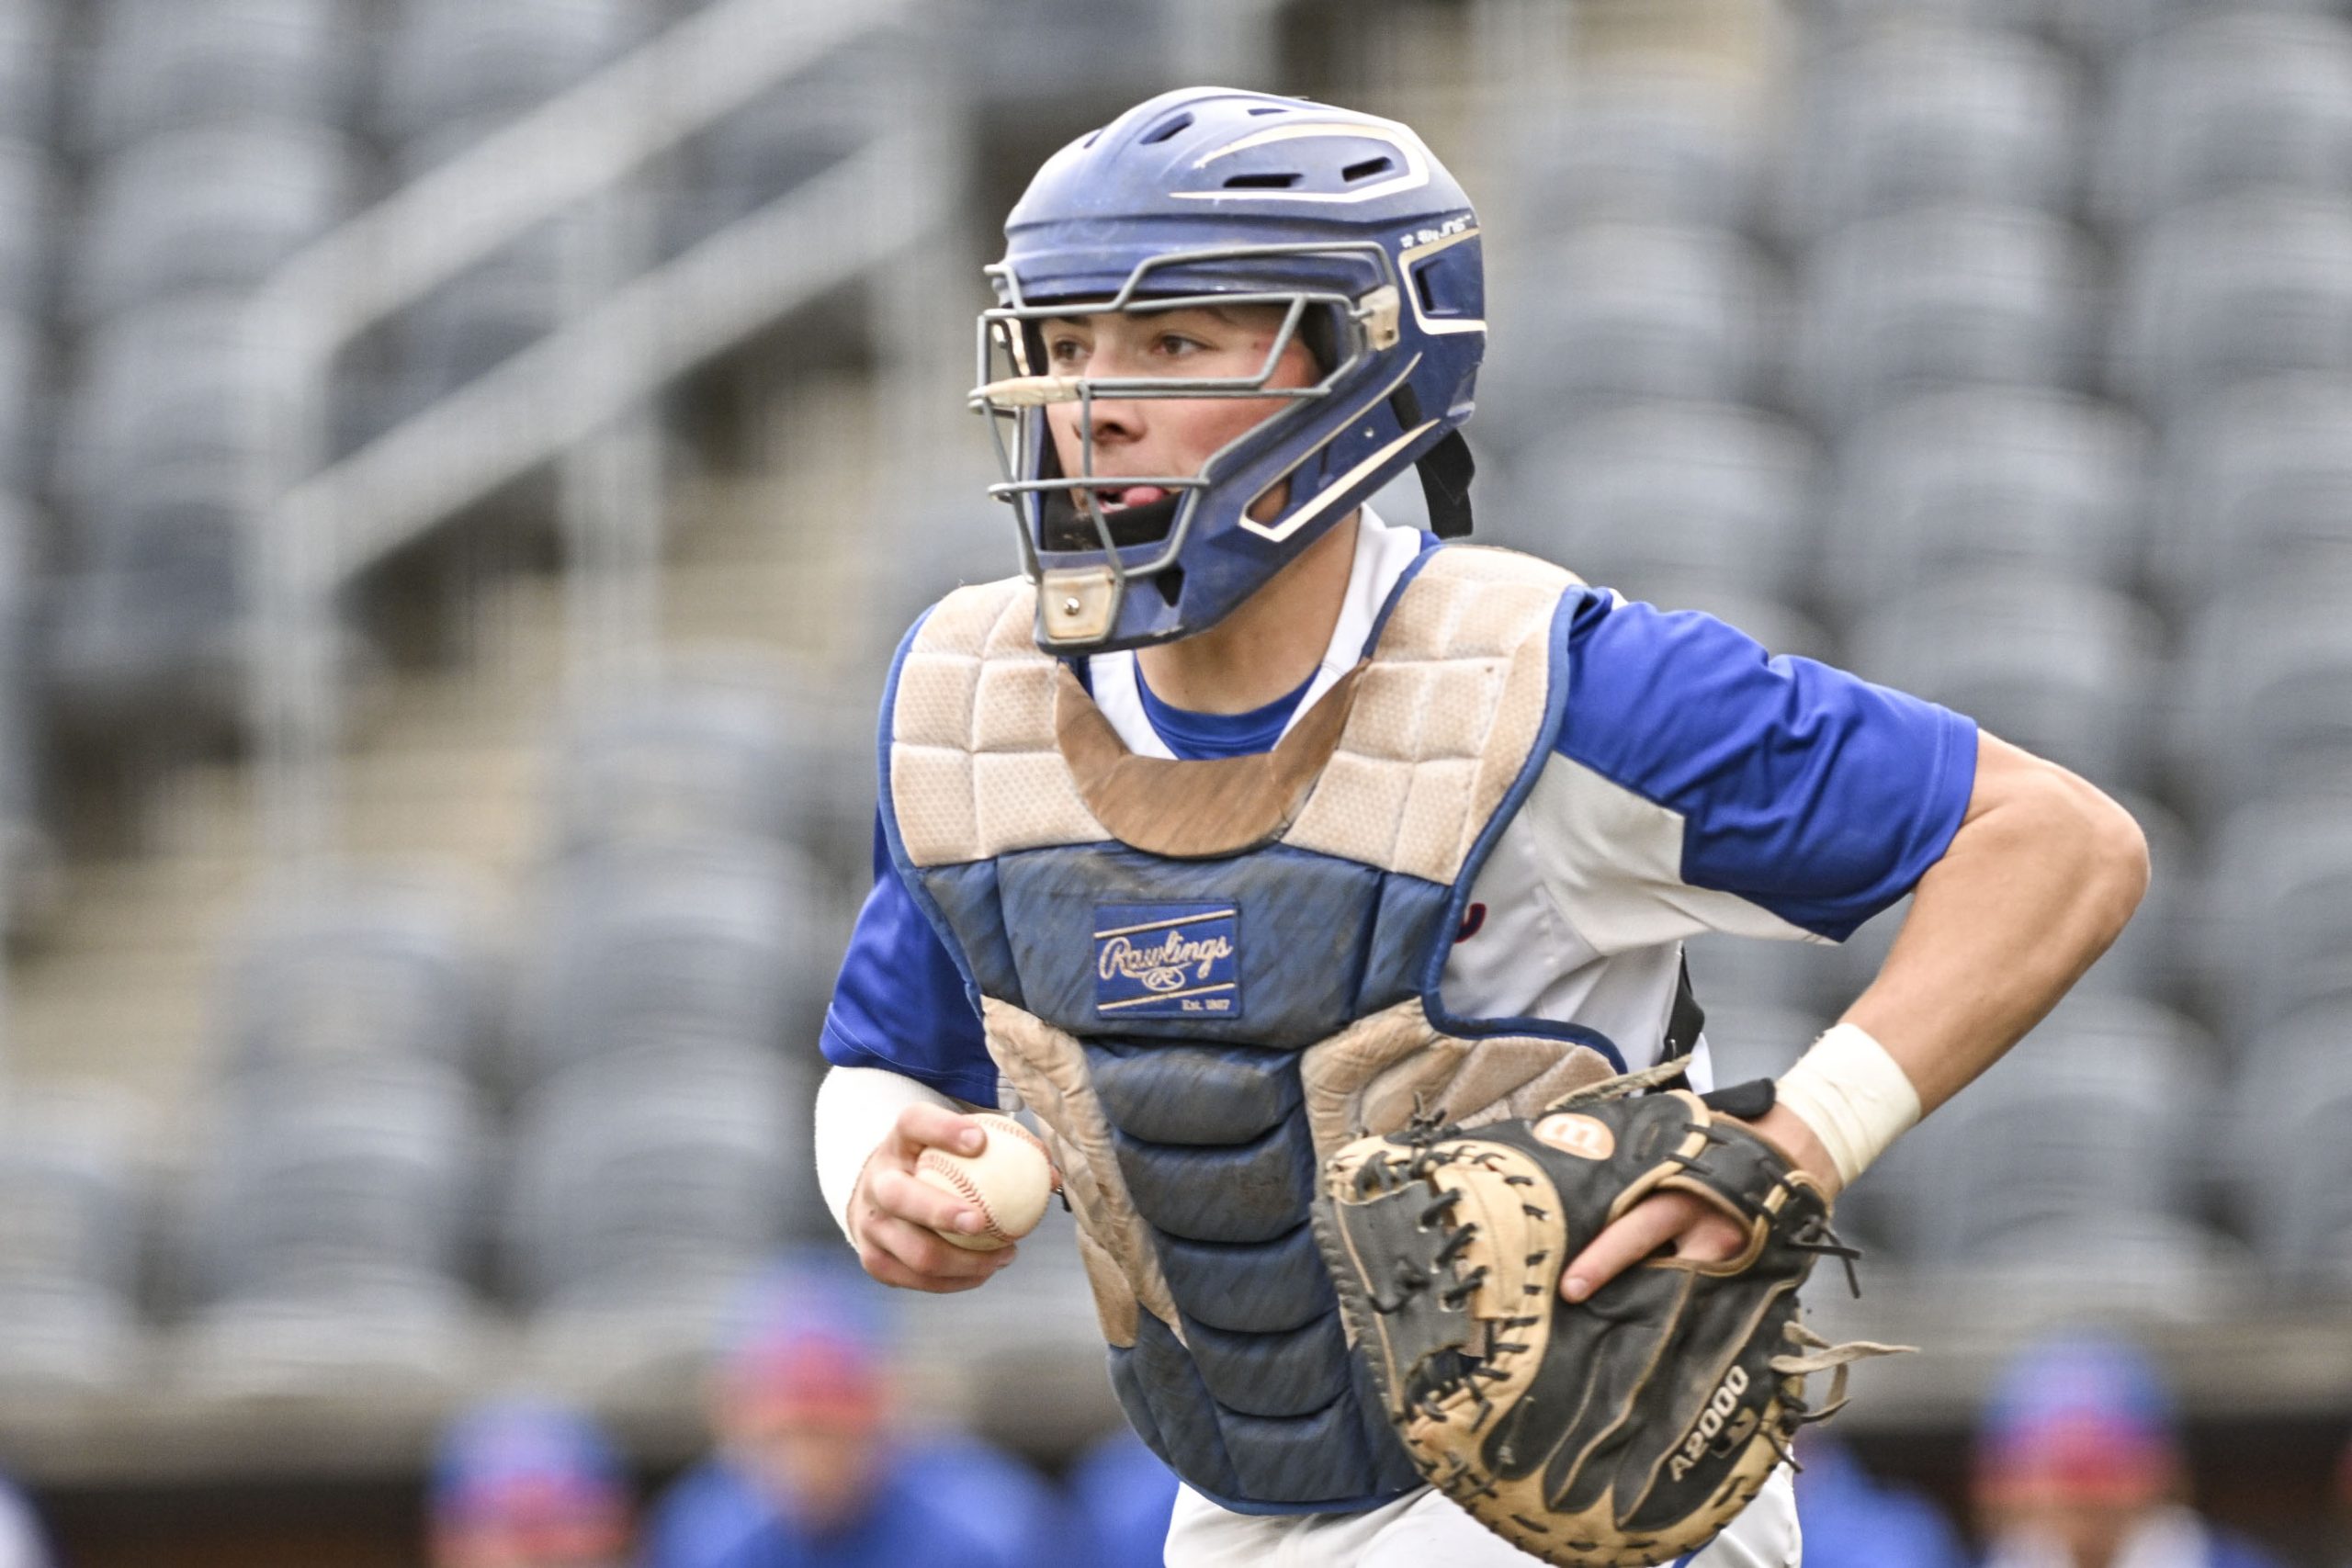 Morgantown's Ty Galusky named 2023 Johnny Bench Award recipient